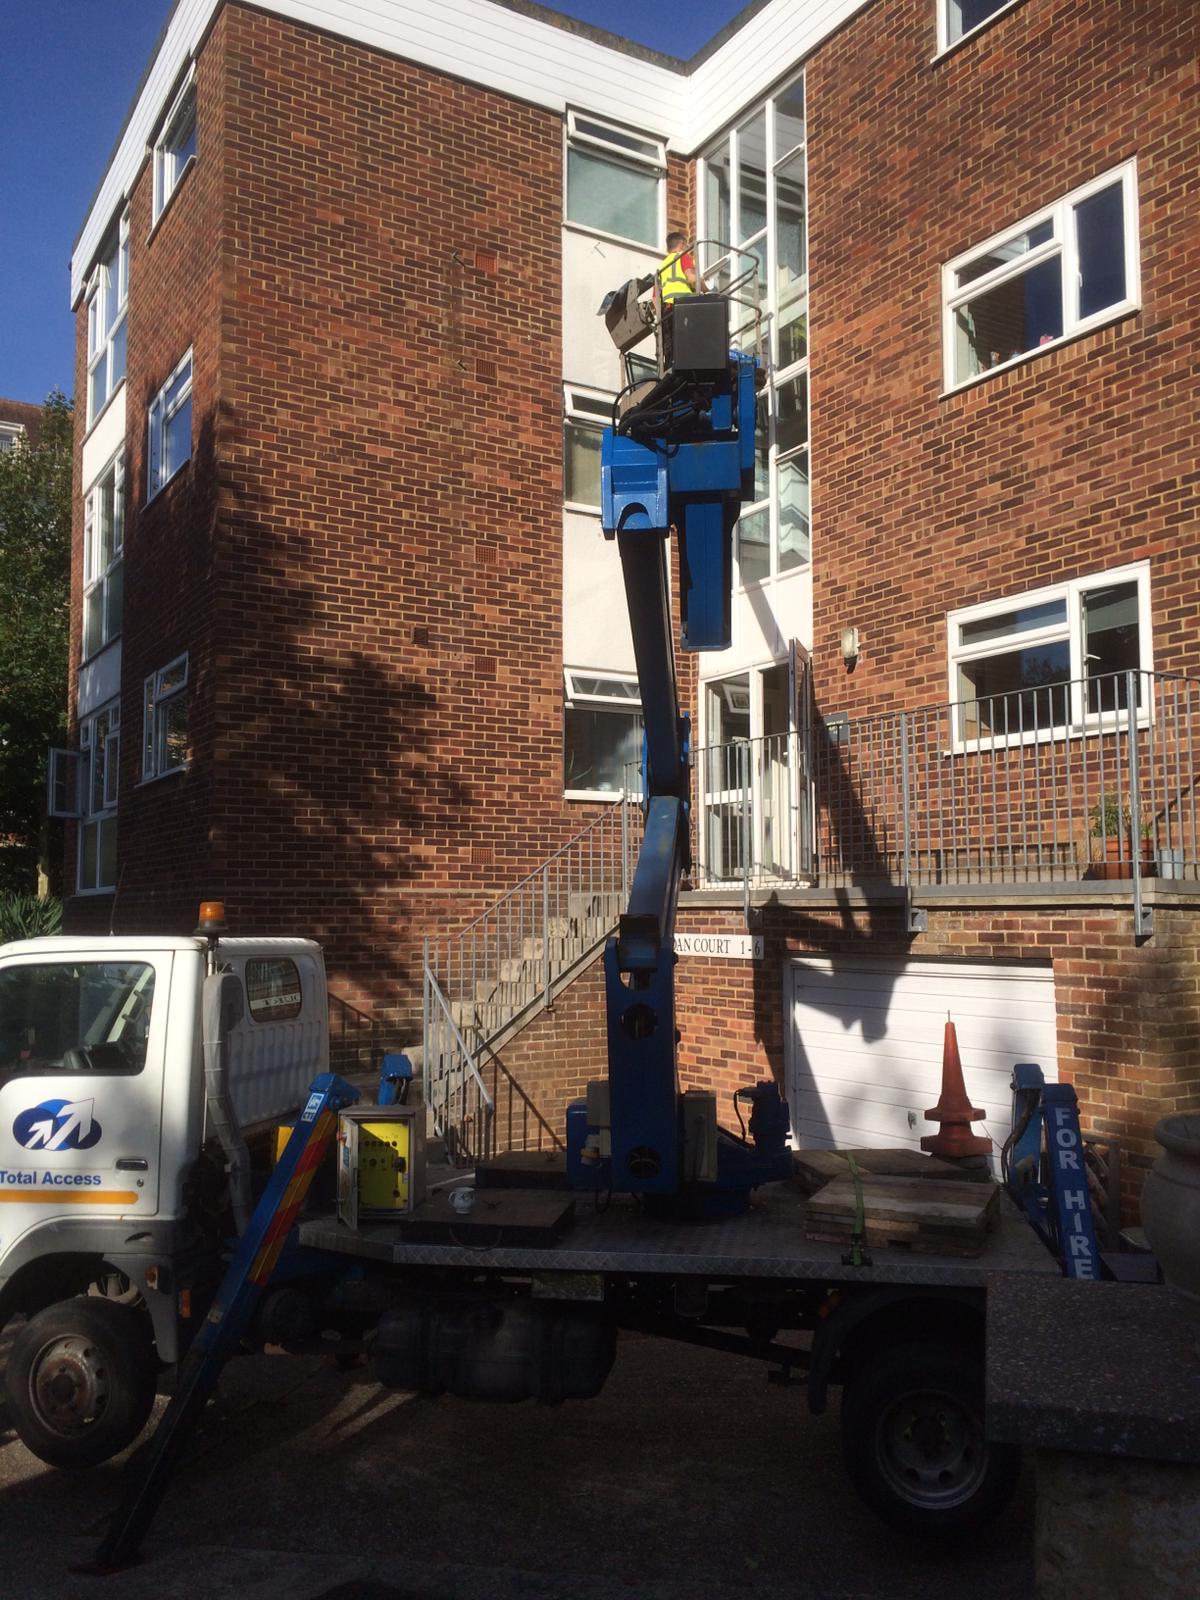 Supplied access in Bexhill for St Leonards windows